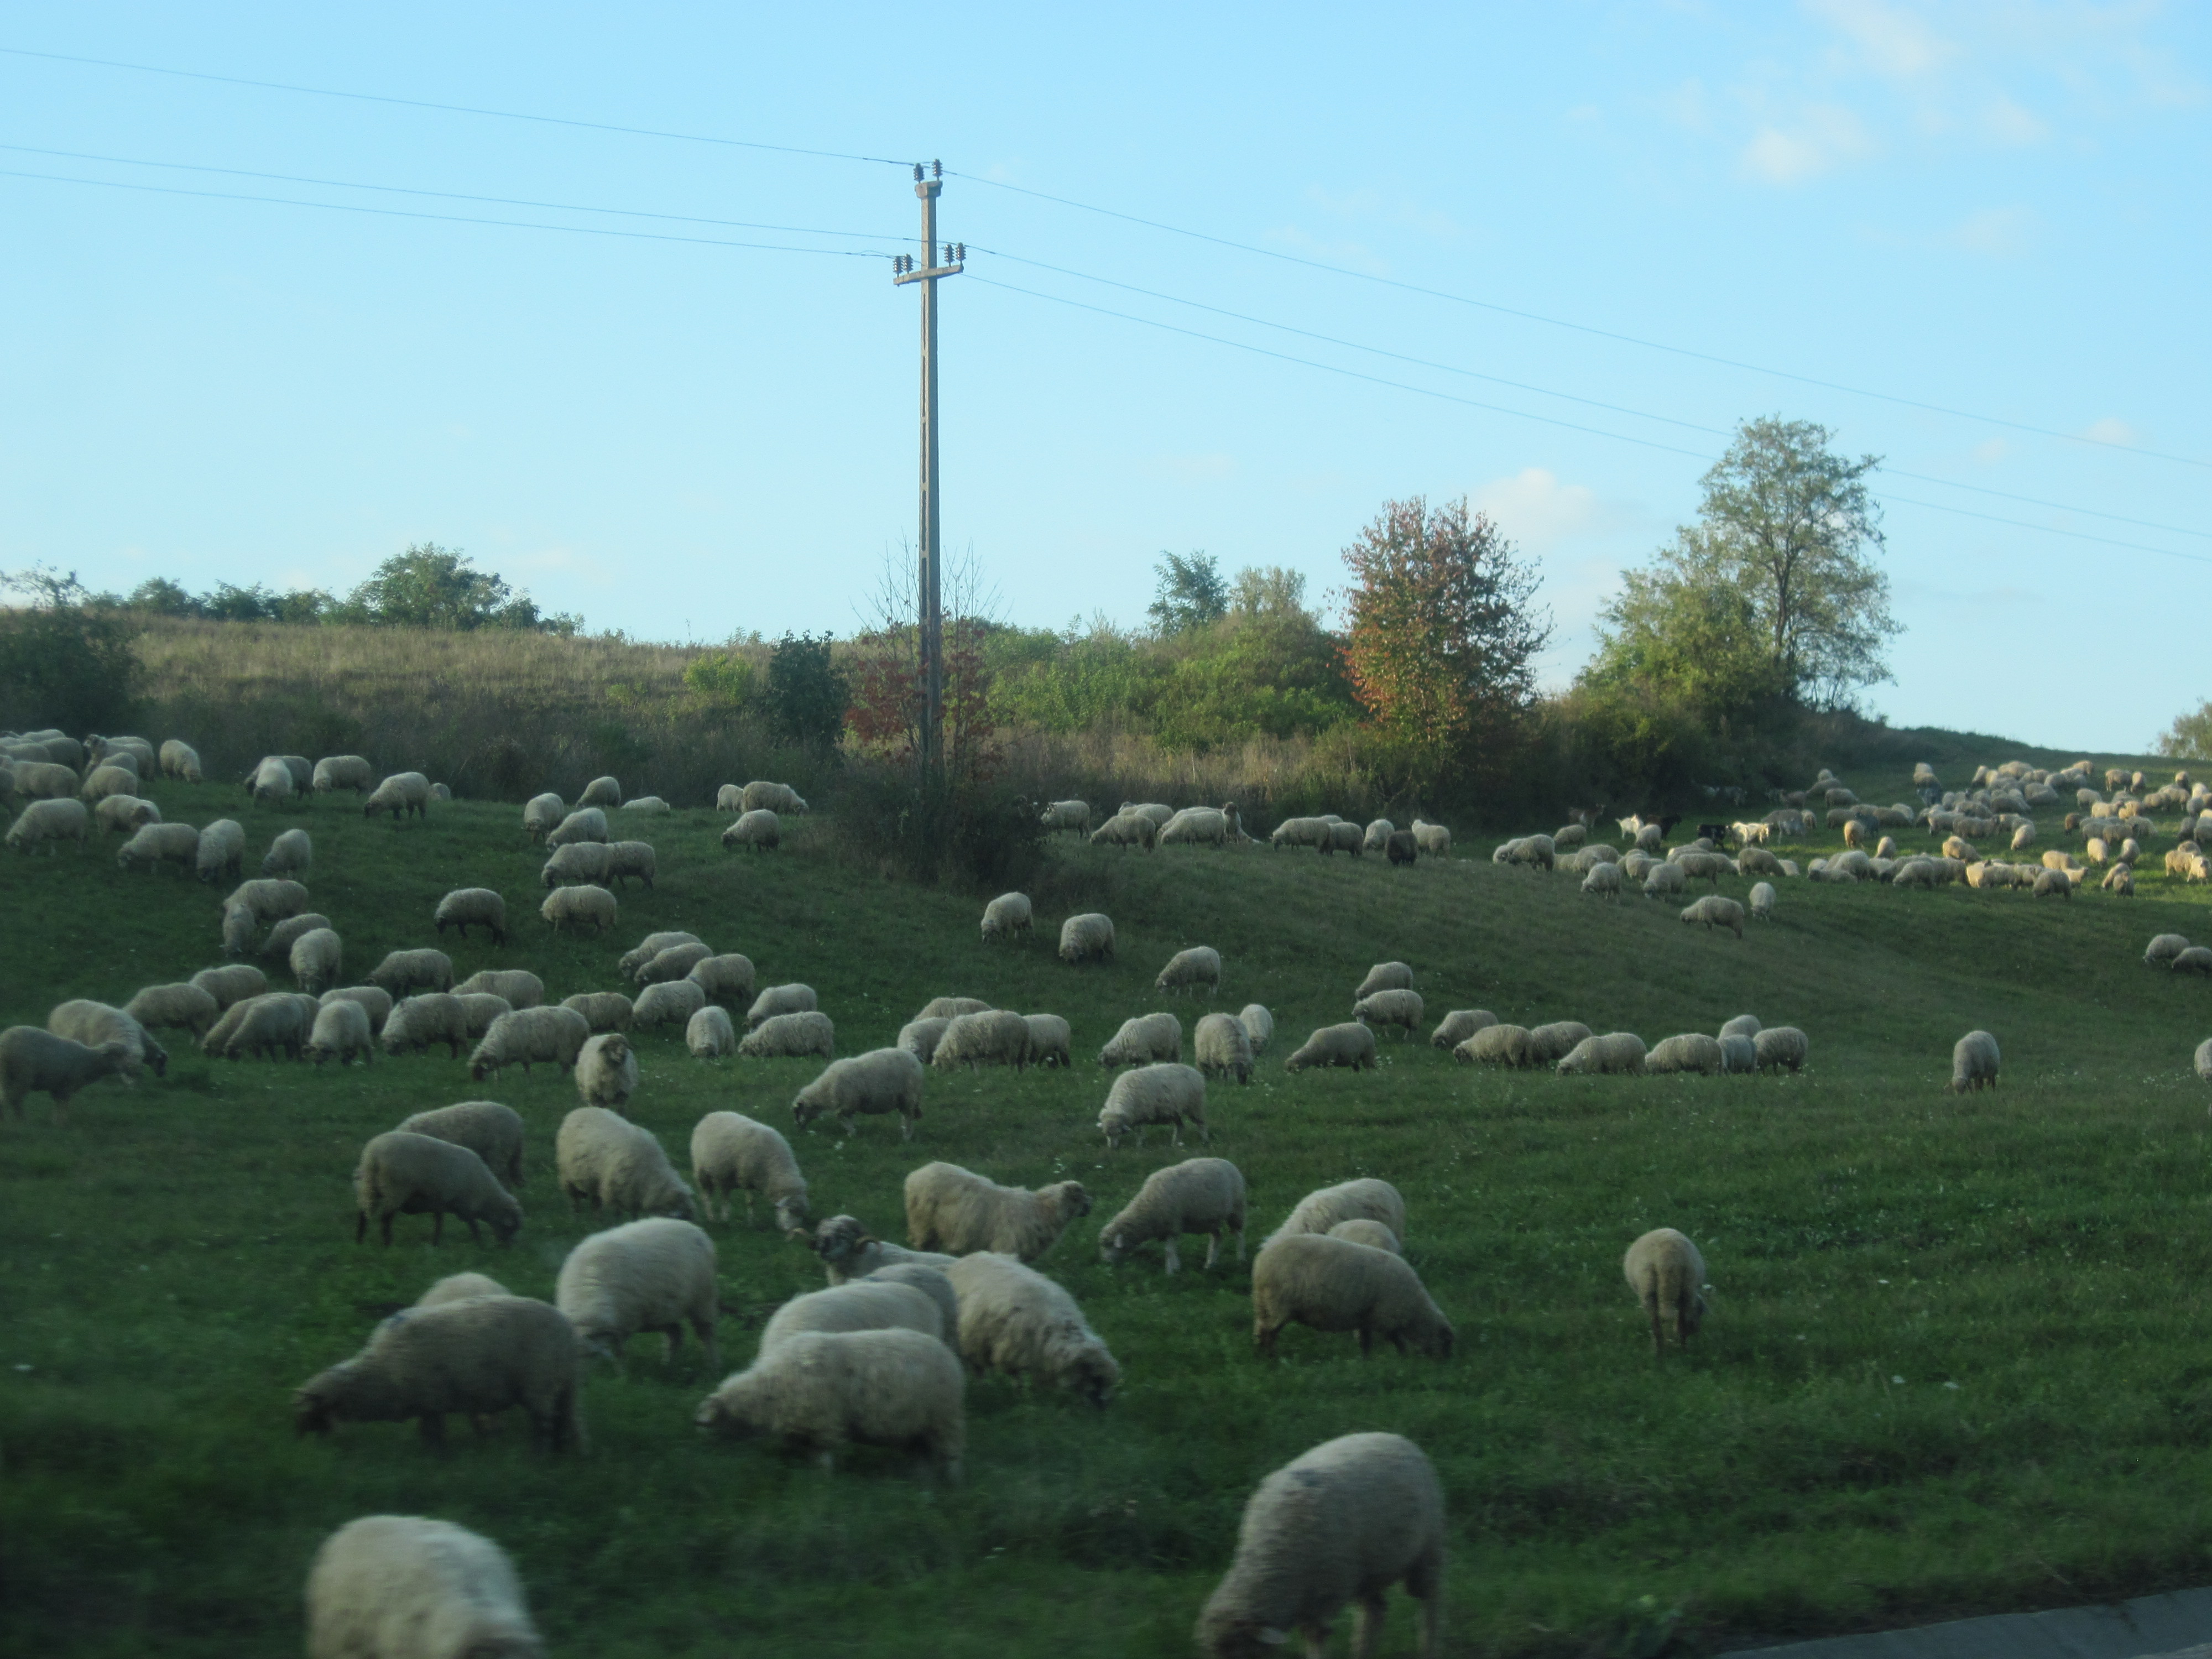 A herd of sheep photo